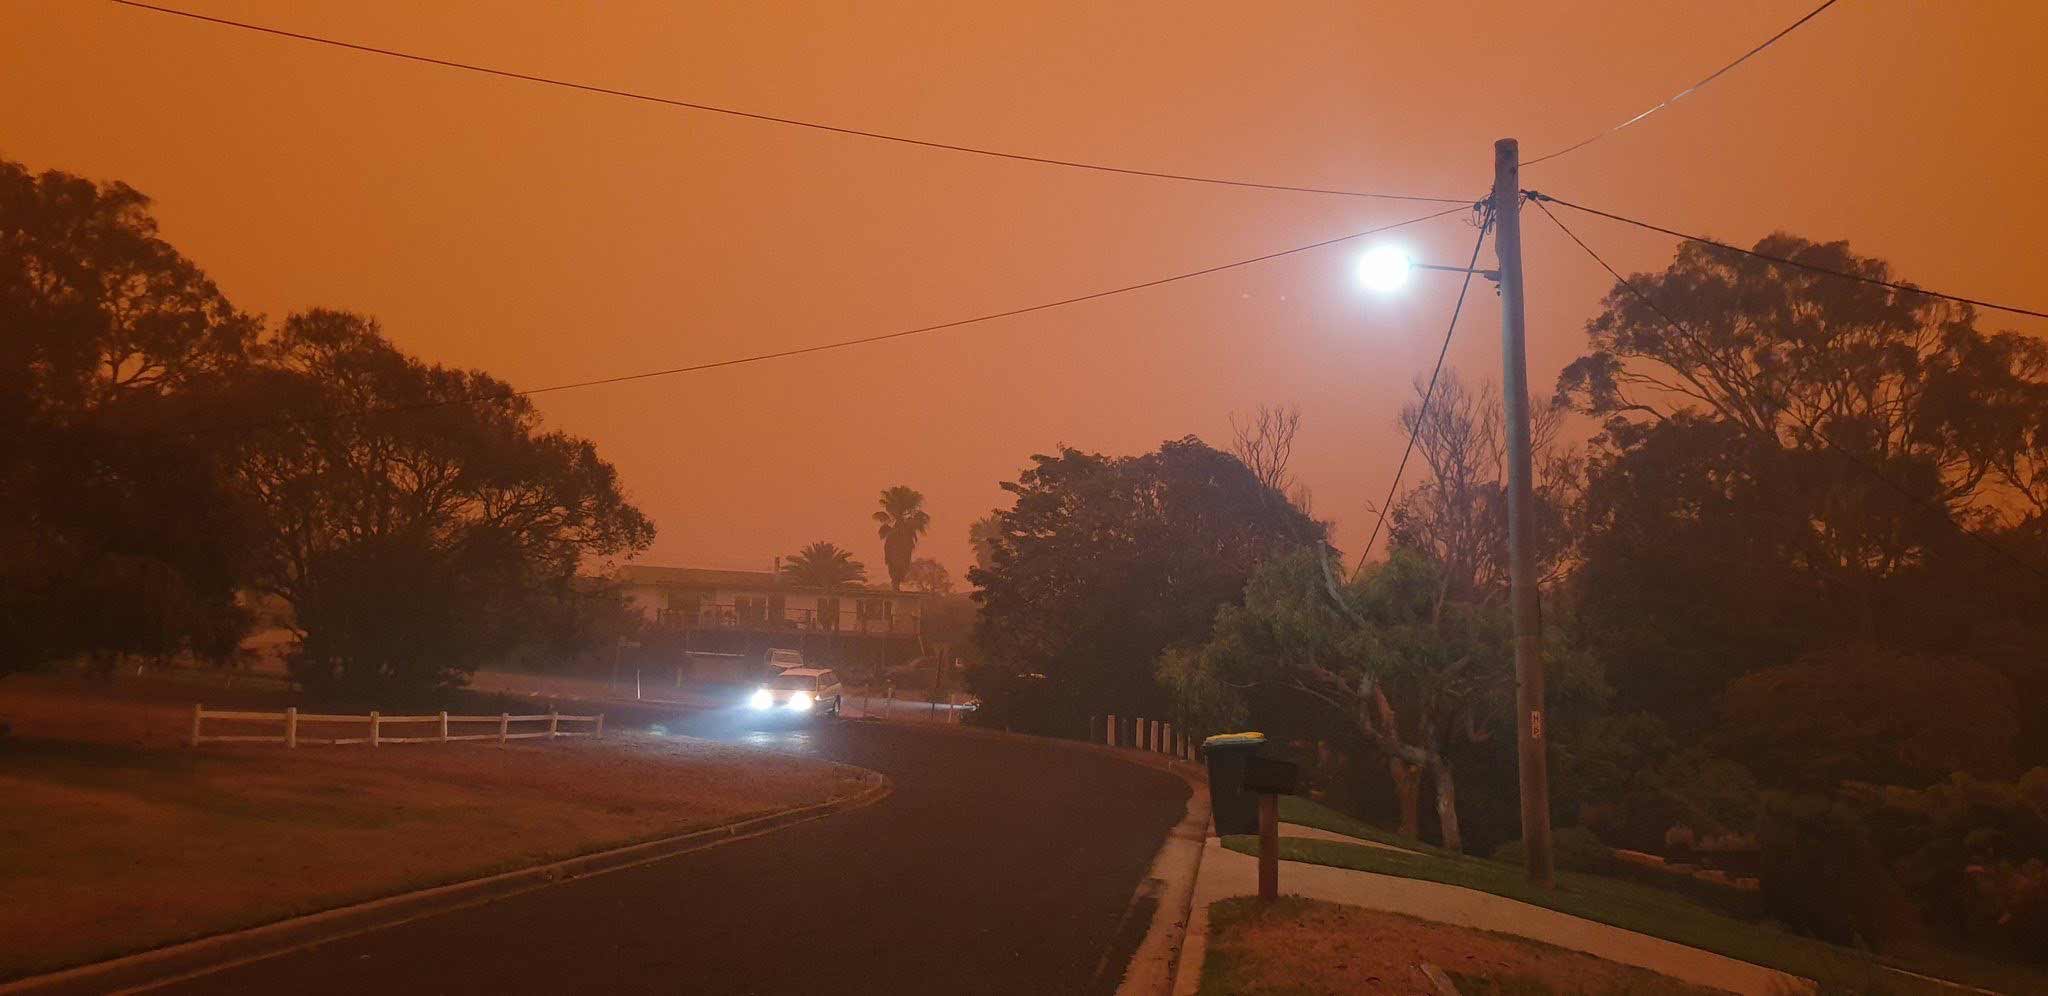 The sky turns an eerie orange in Australia as a result of the bushfires